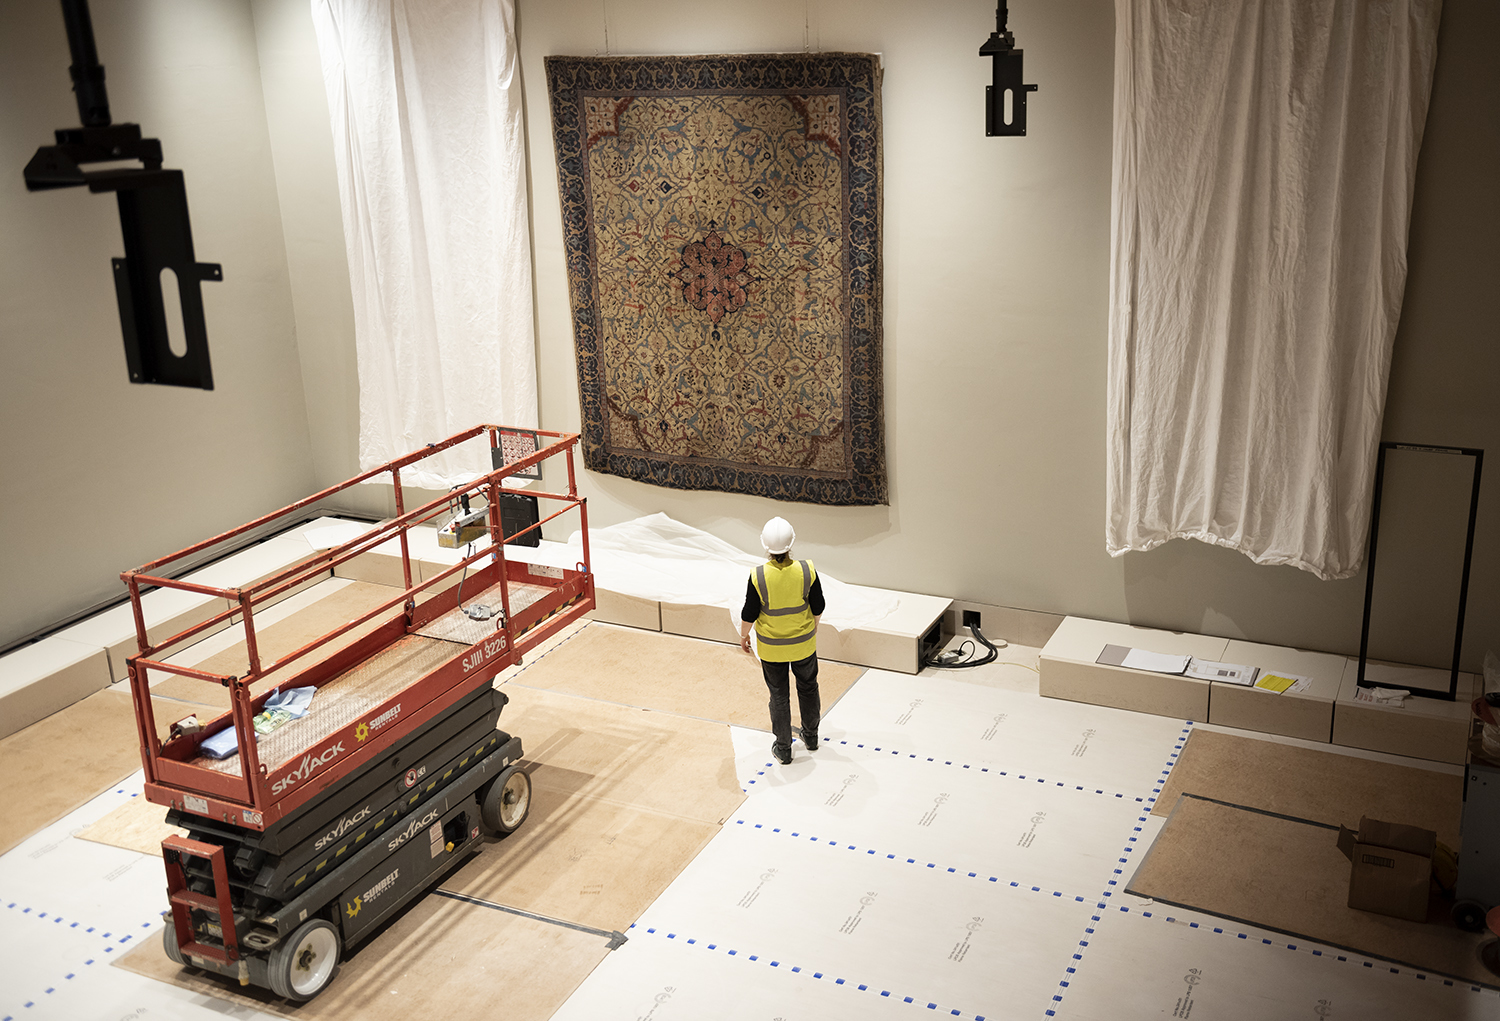 The Burrell Collection Arabesque Carpet install complete.